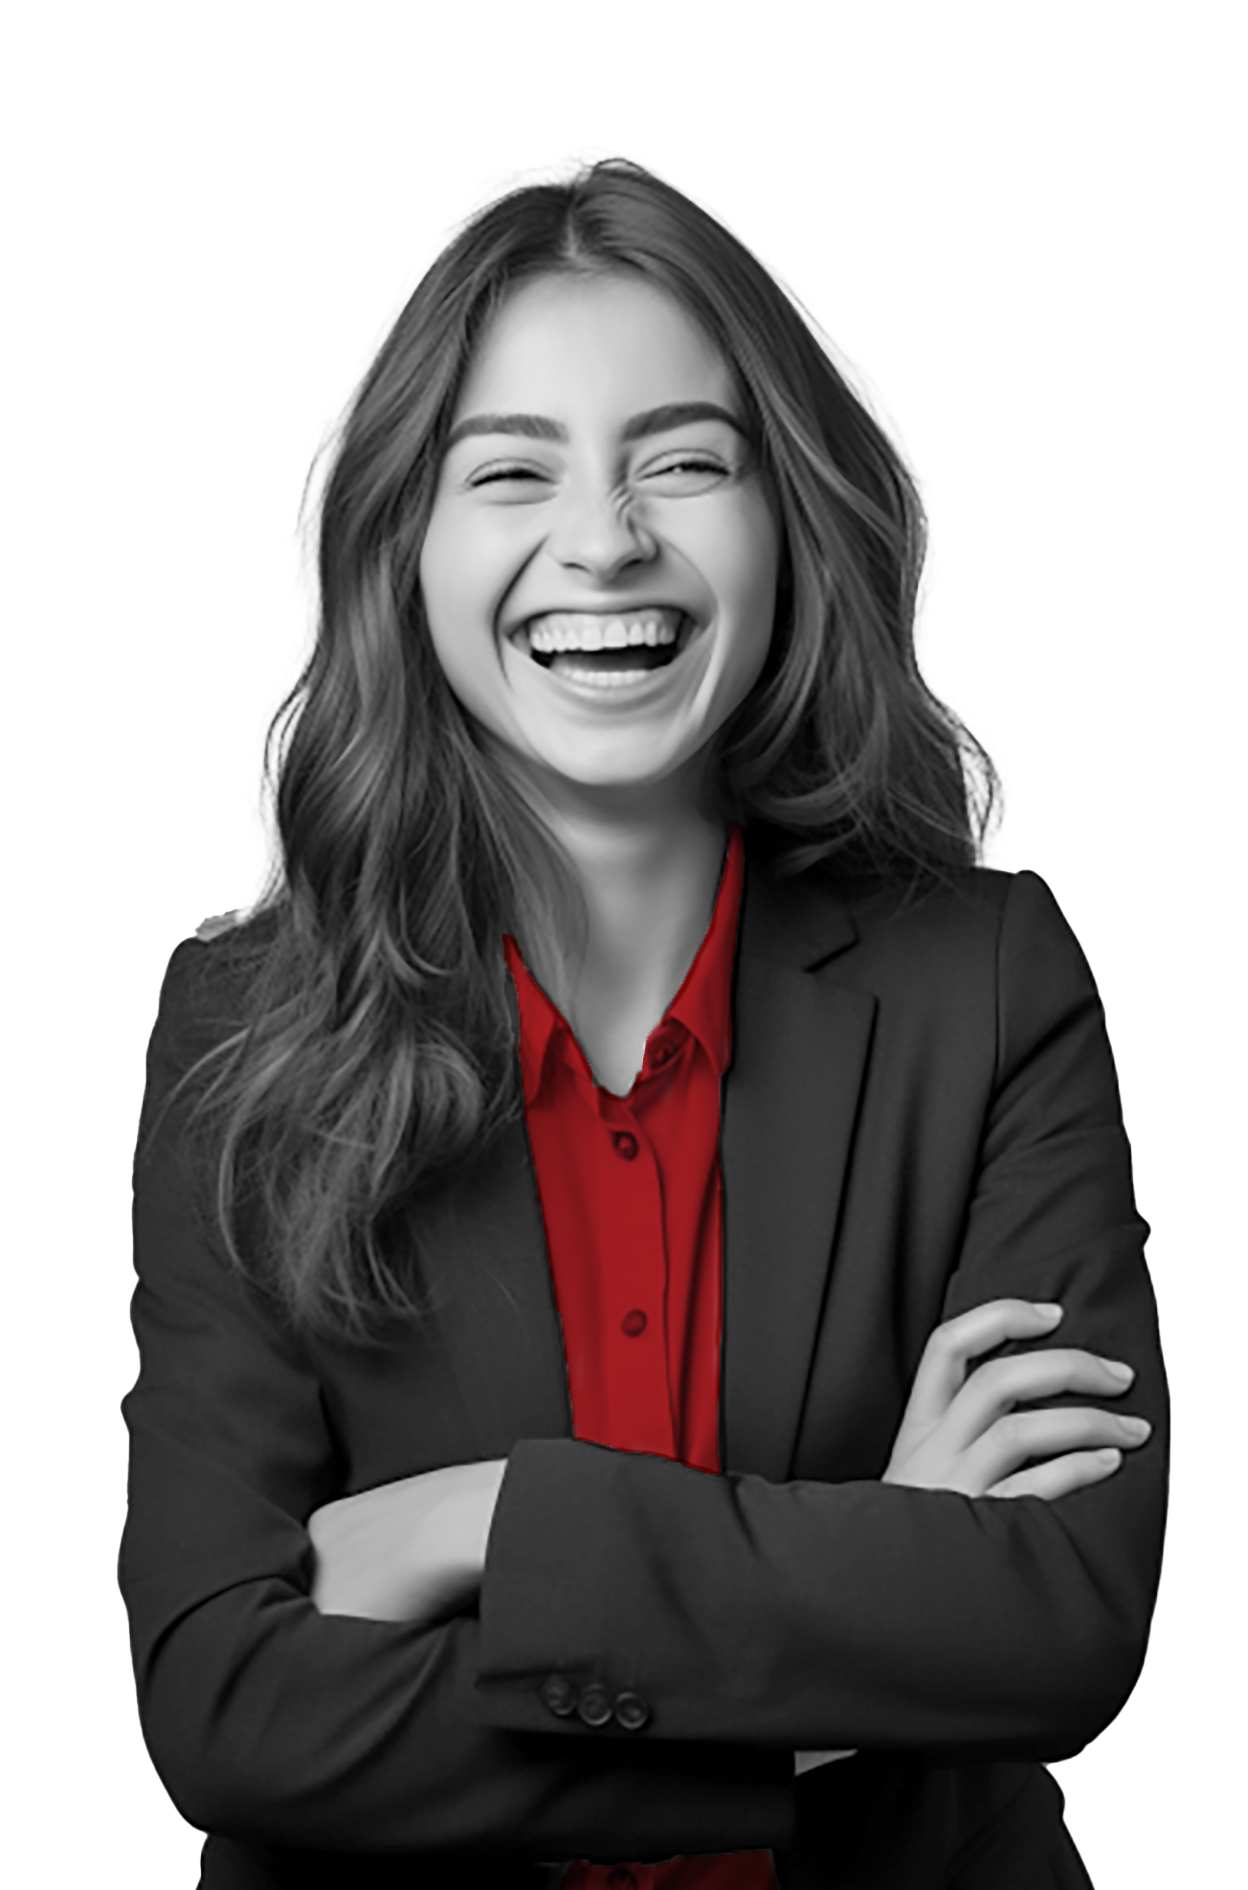 a woman in a suit and red shirt is laughing with her arms crossed